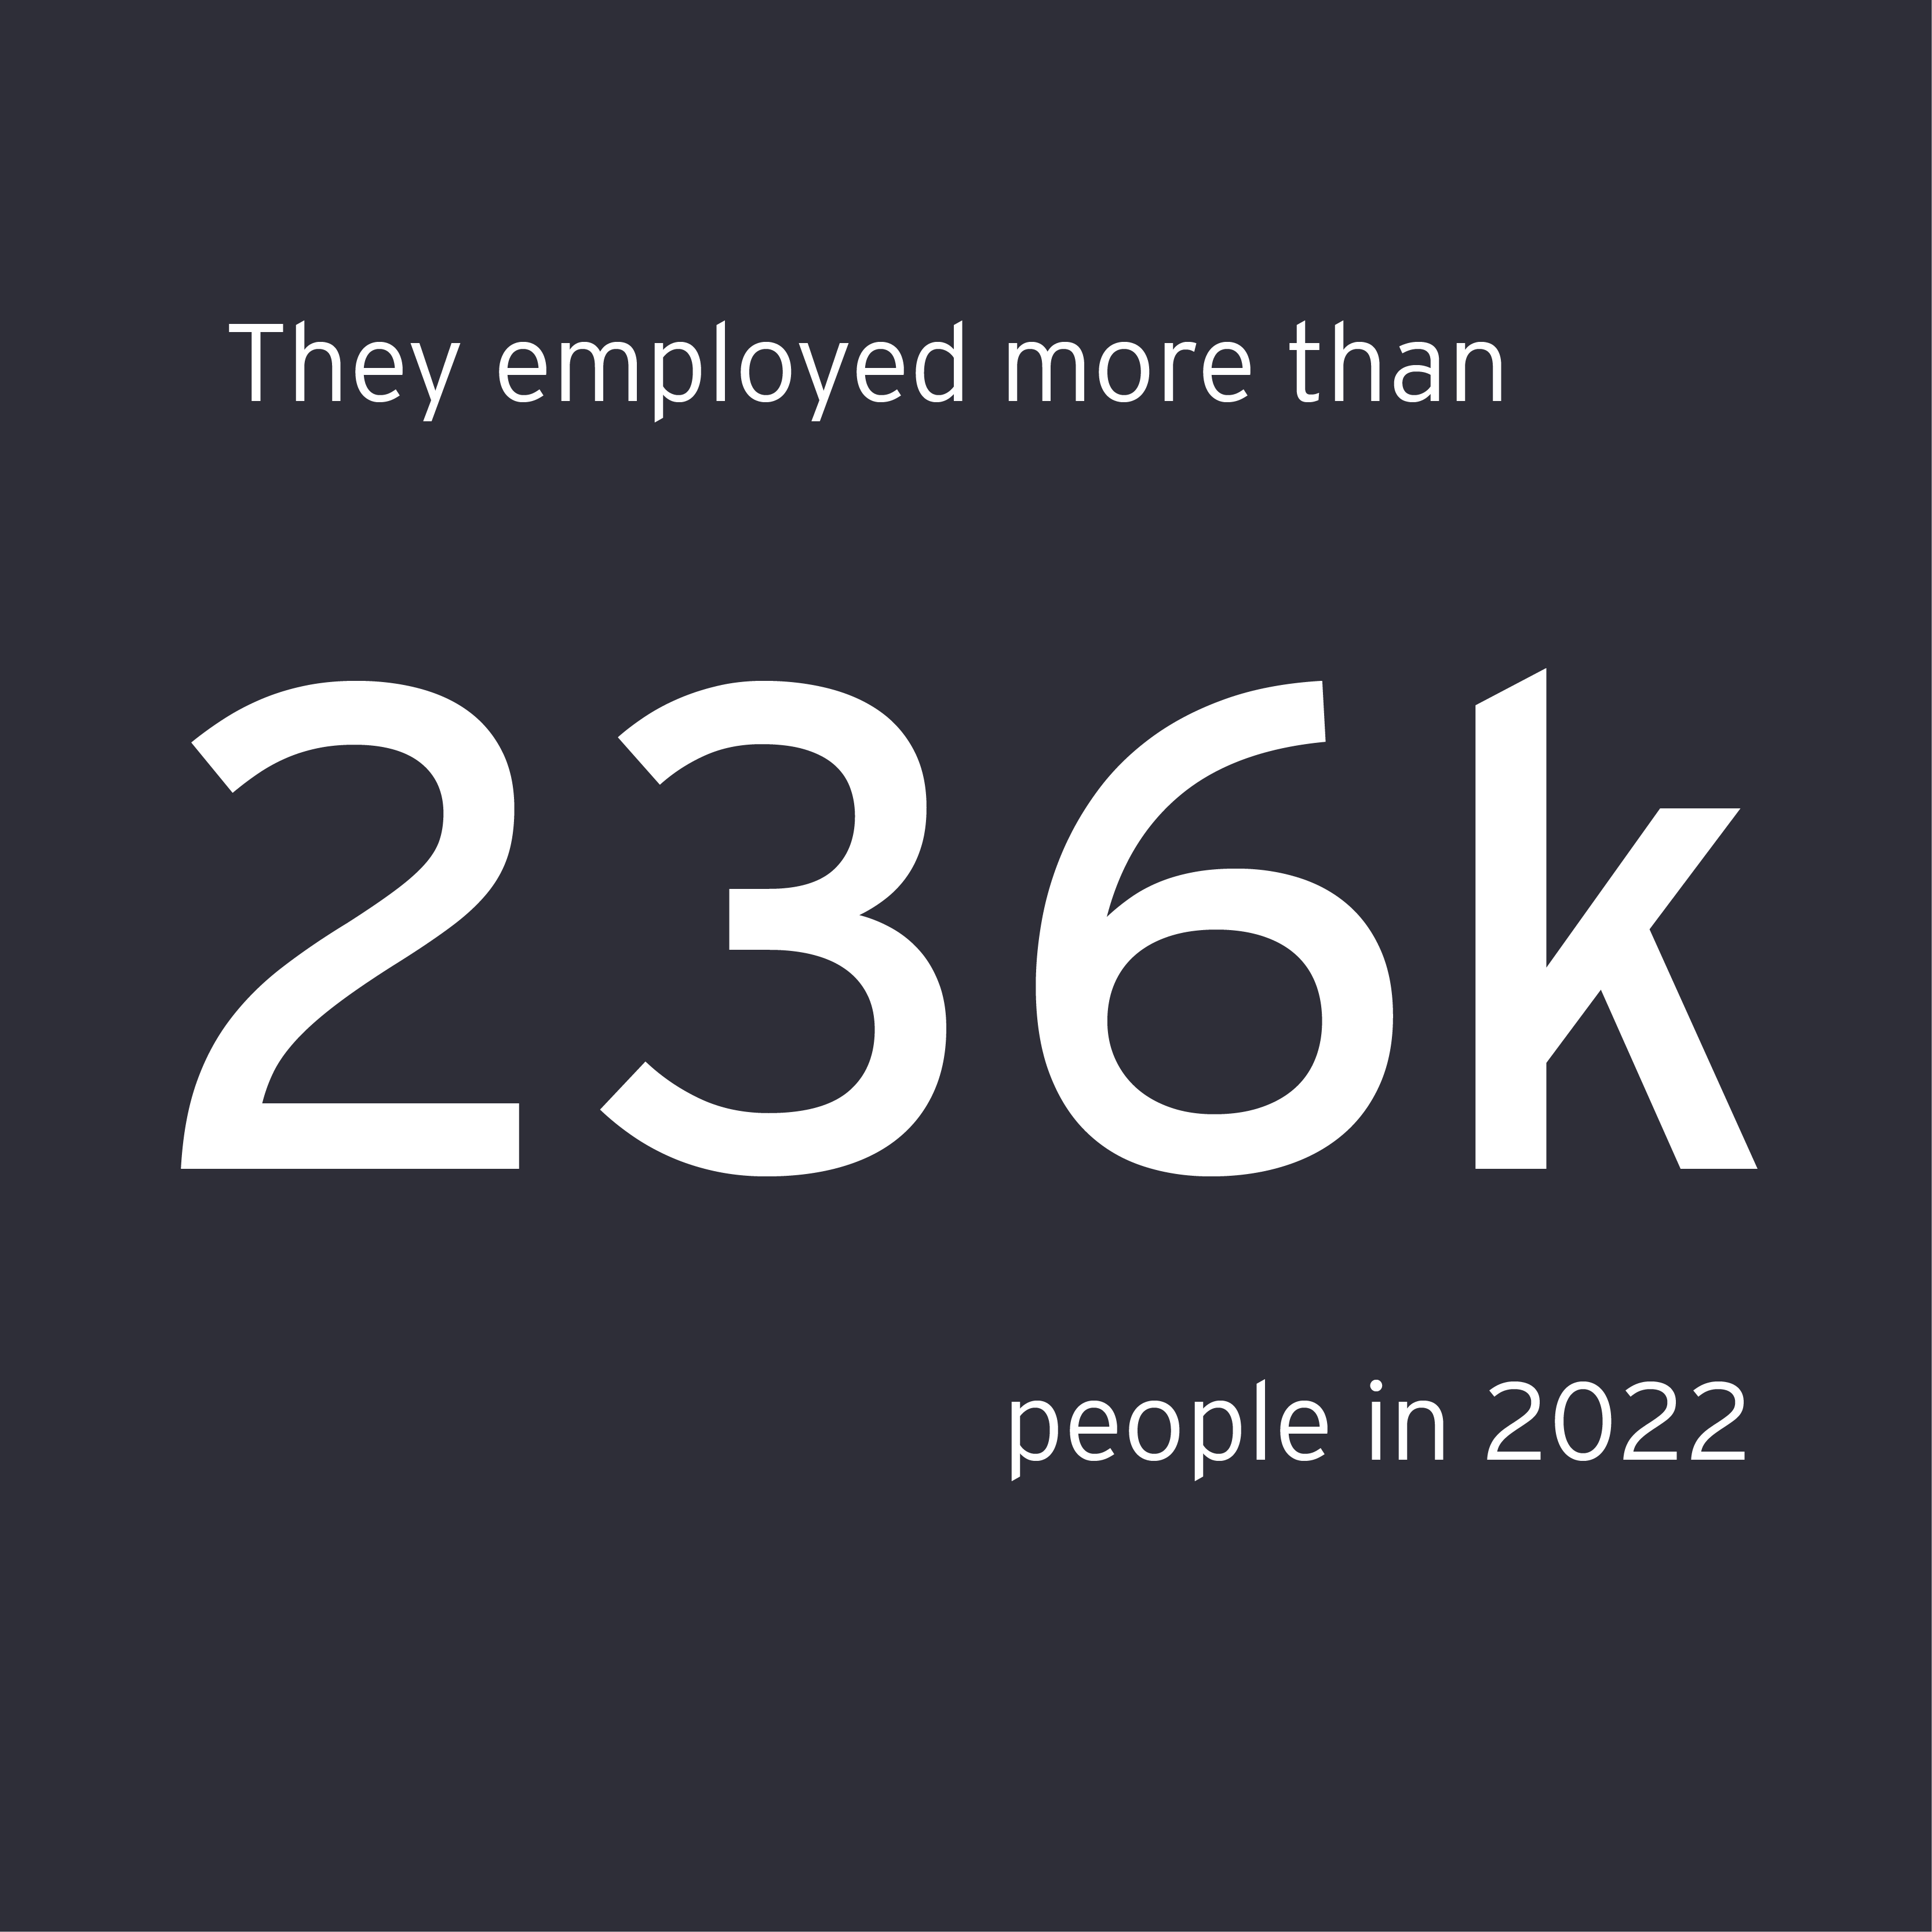 EOY winners employed more than 236,000 people in 2022